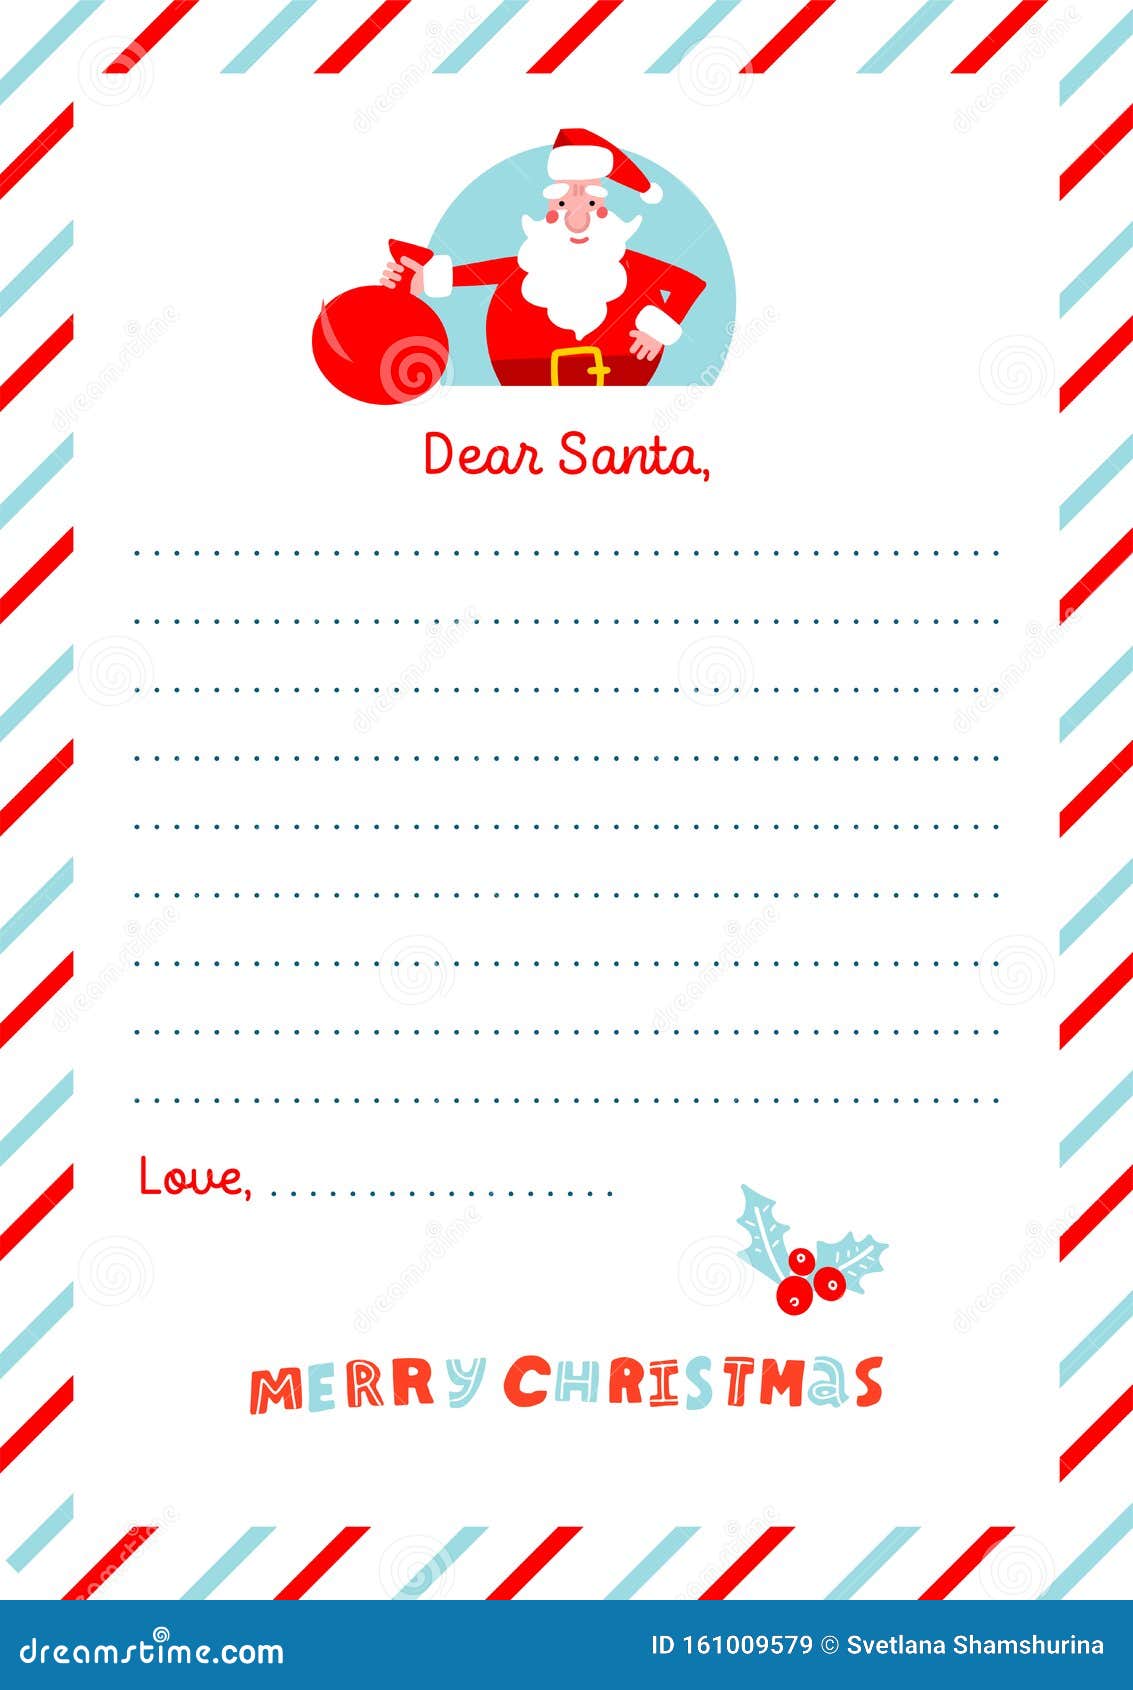 A22 Christmas Letter To Santa Claus Template. Decorated Paper Sheet With Christmas Note Paper Template